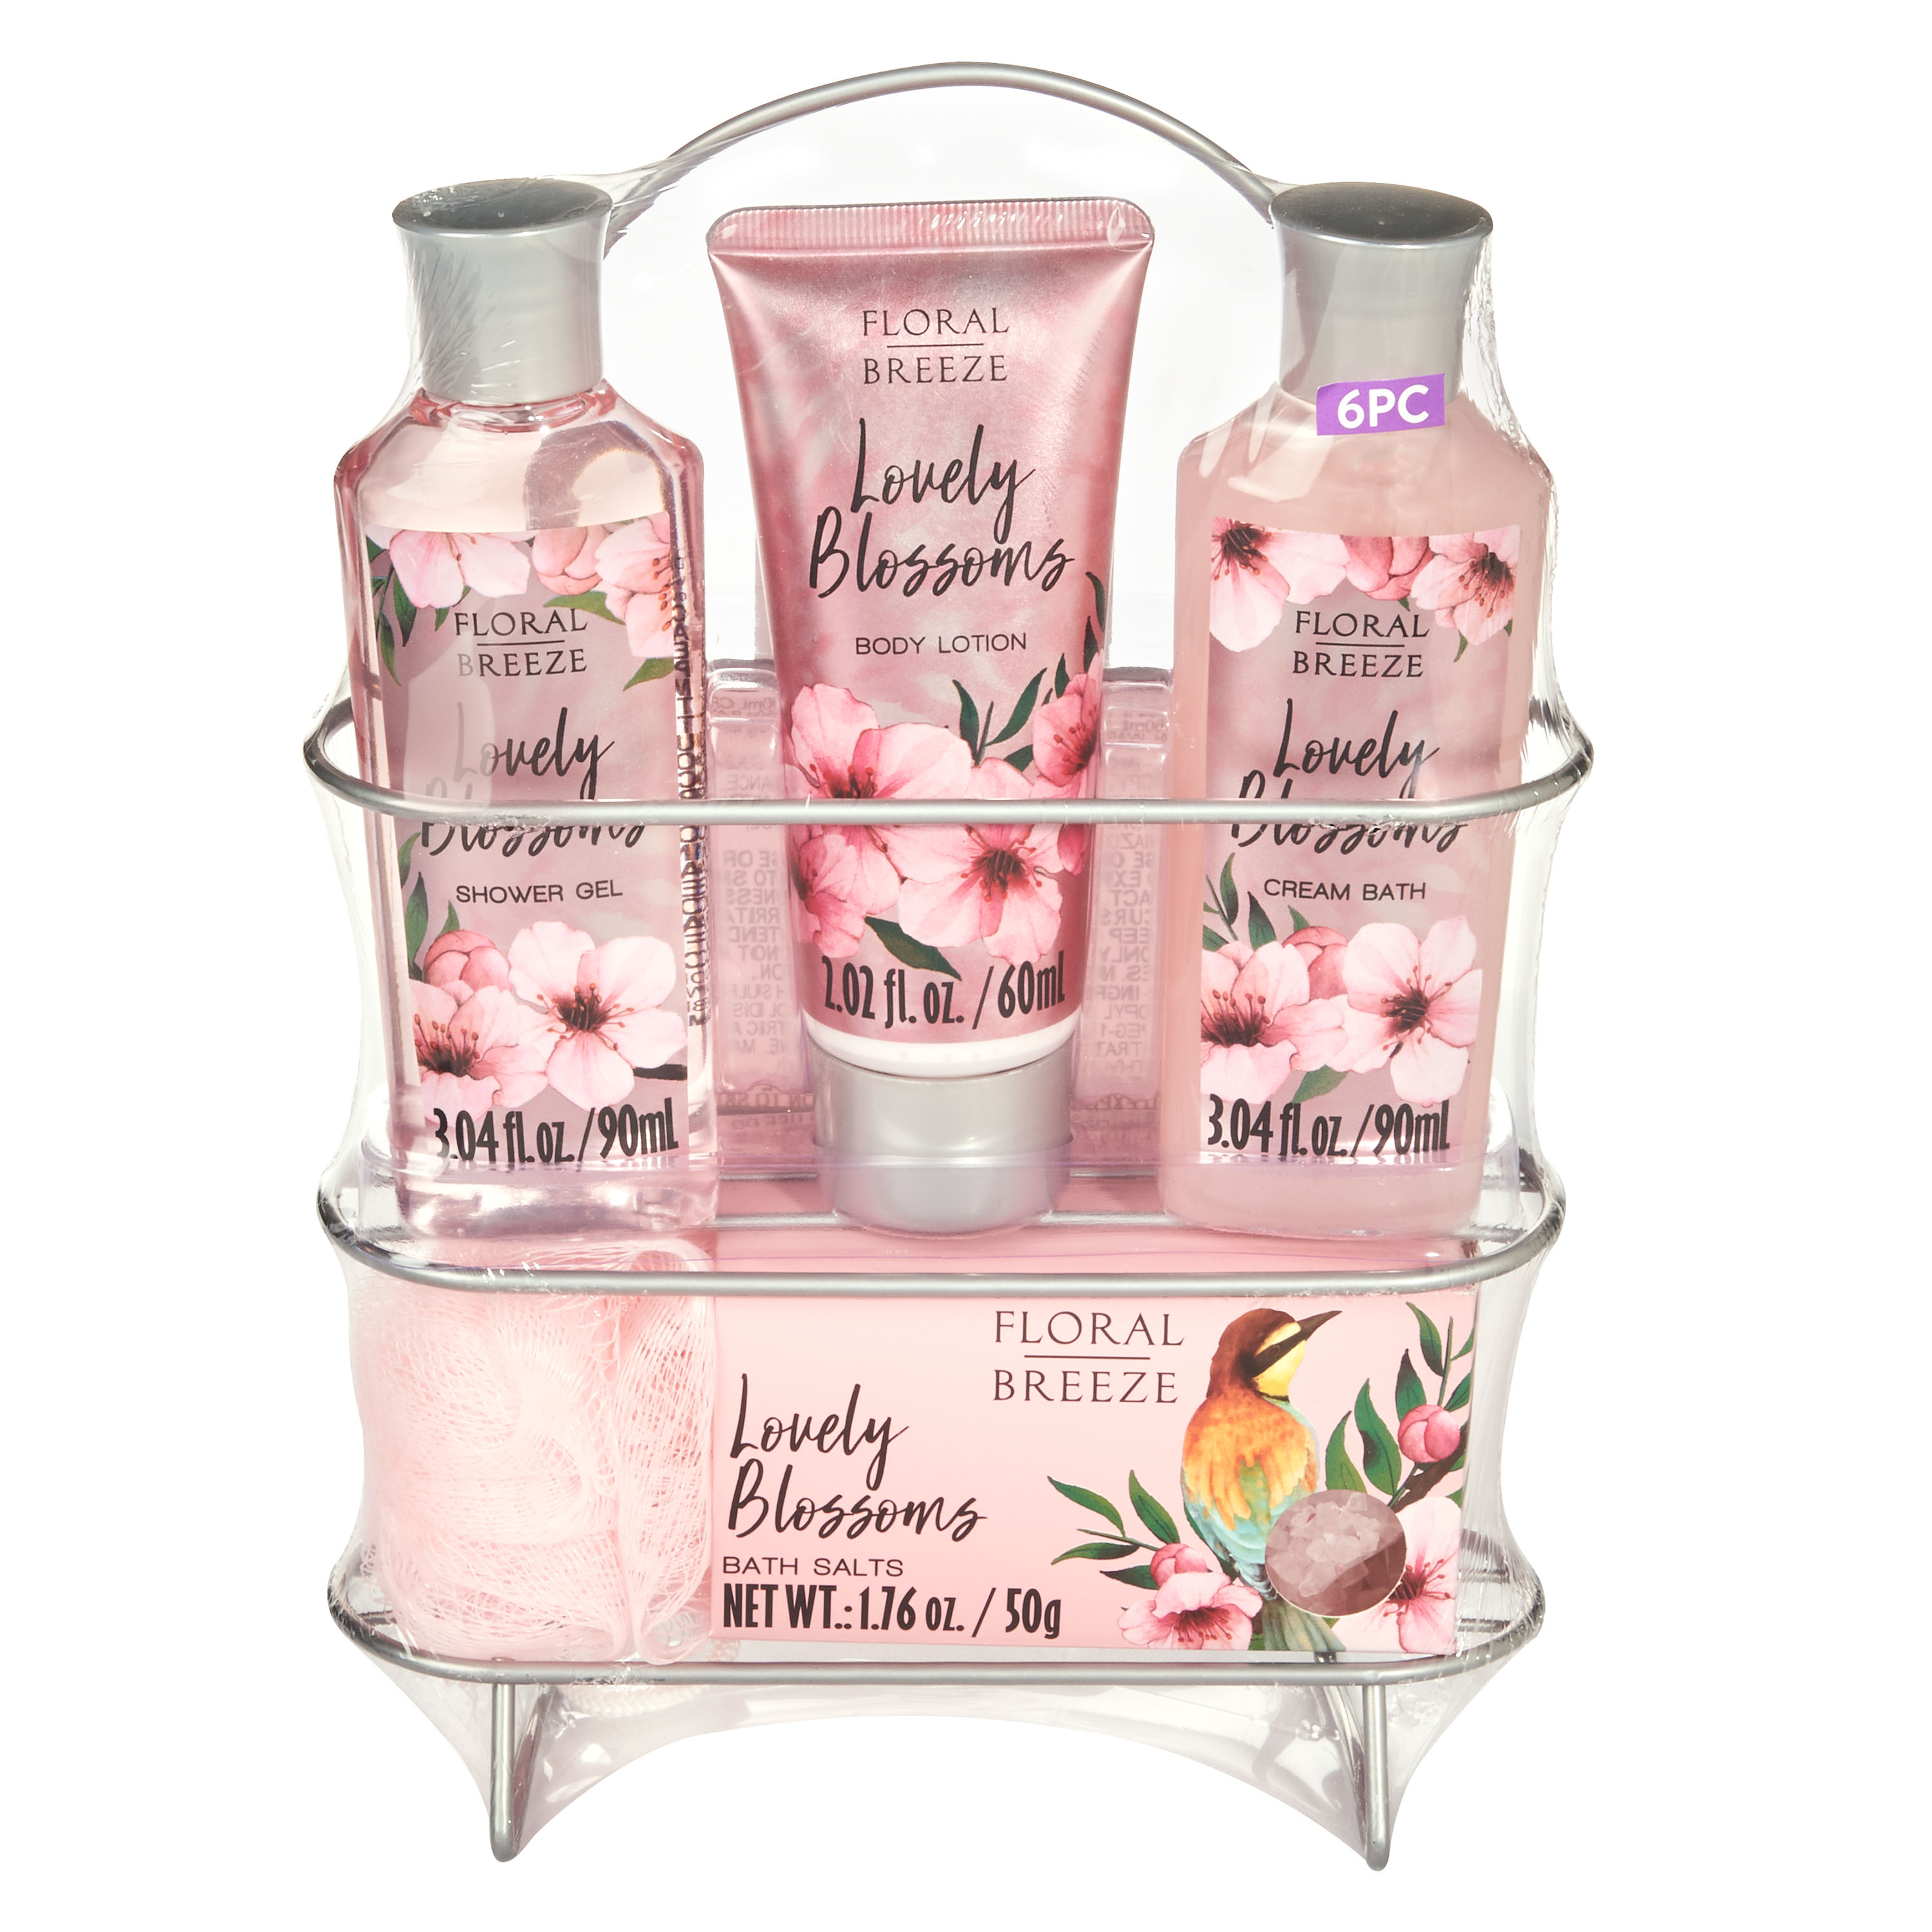 Floral Breeze 6-Piece Lovely Blossoms Bath and Body Gift Set with Shower Caddy - image 1 of 7